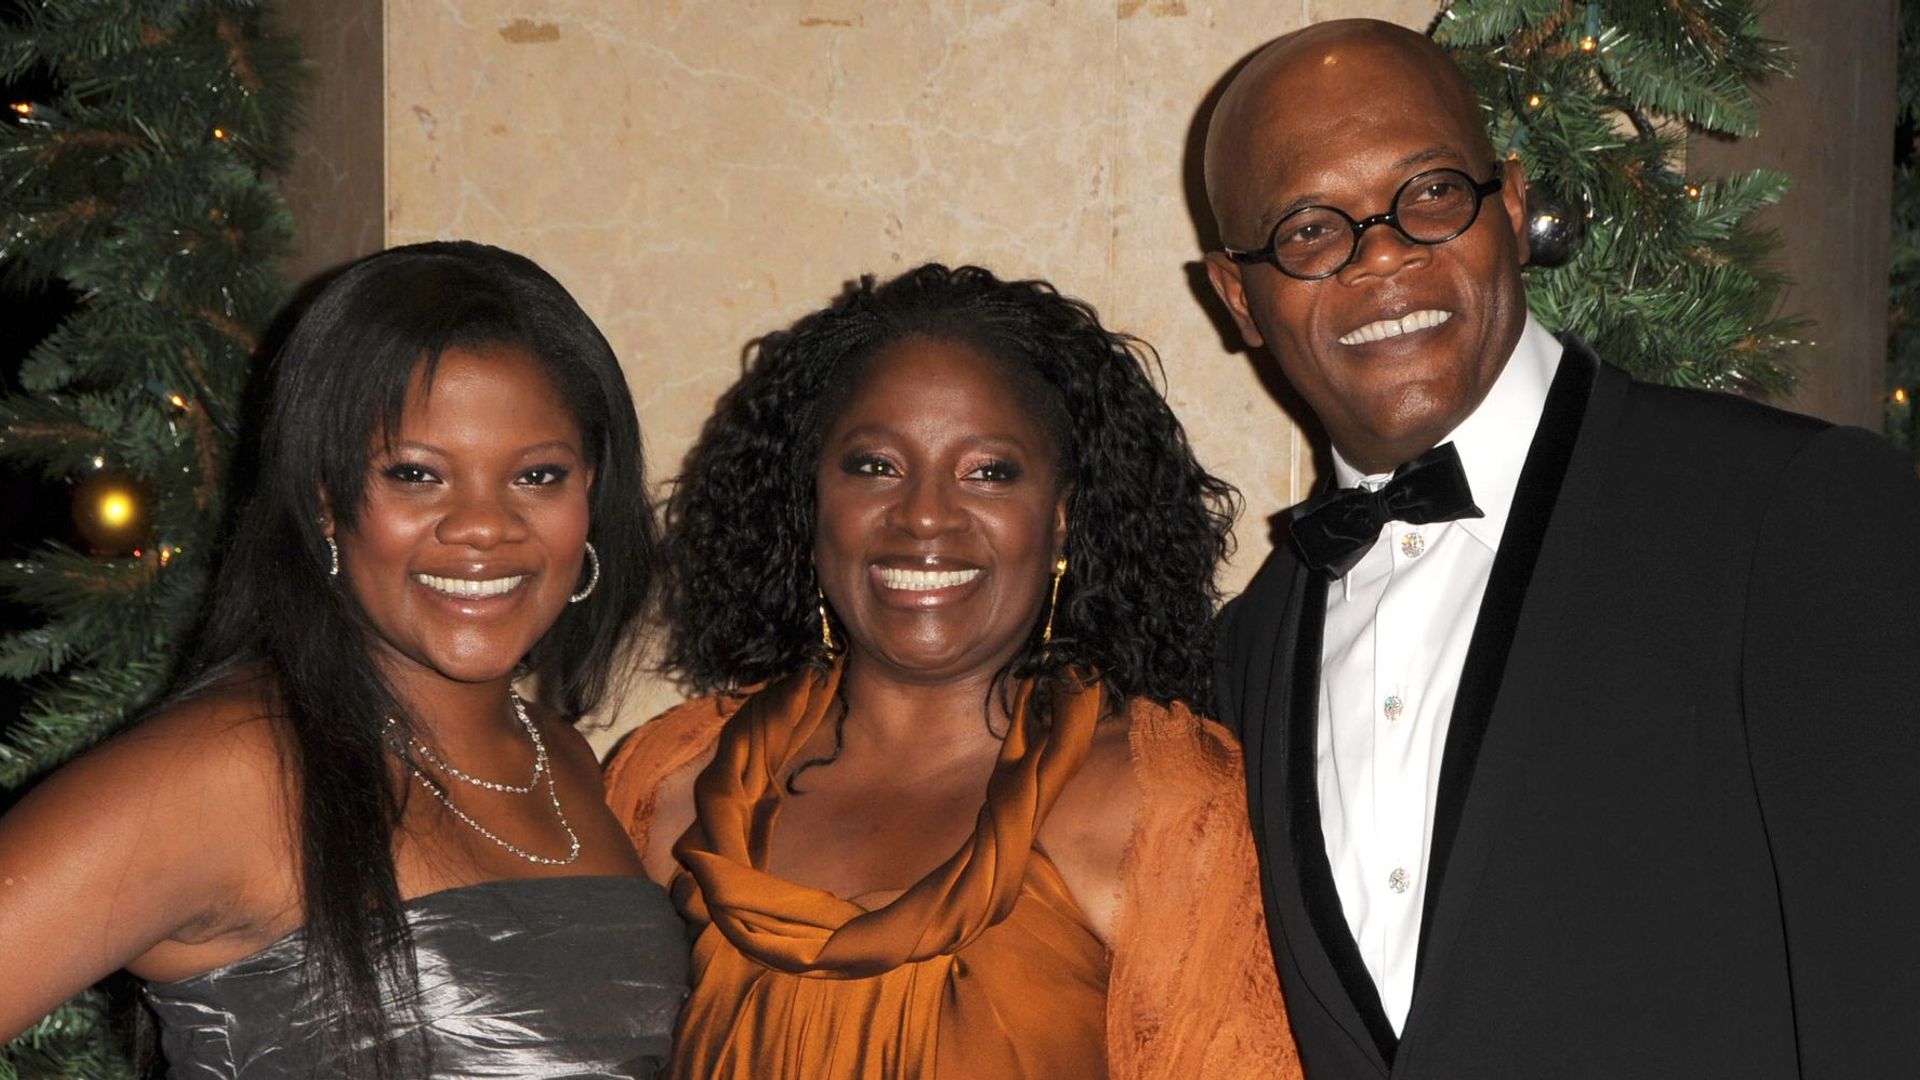 Samuel L. Jackson with his wife and daughter